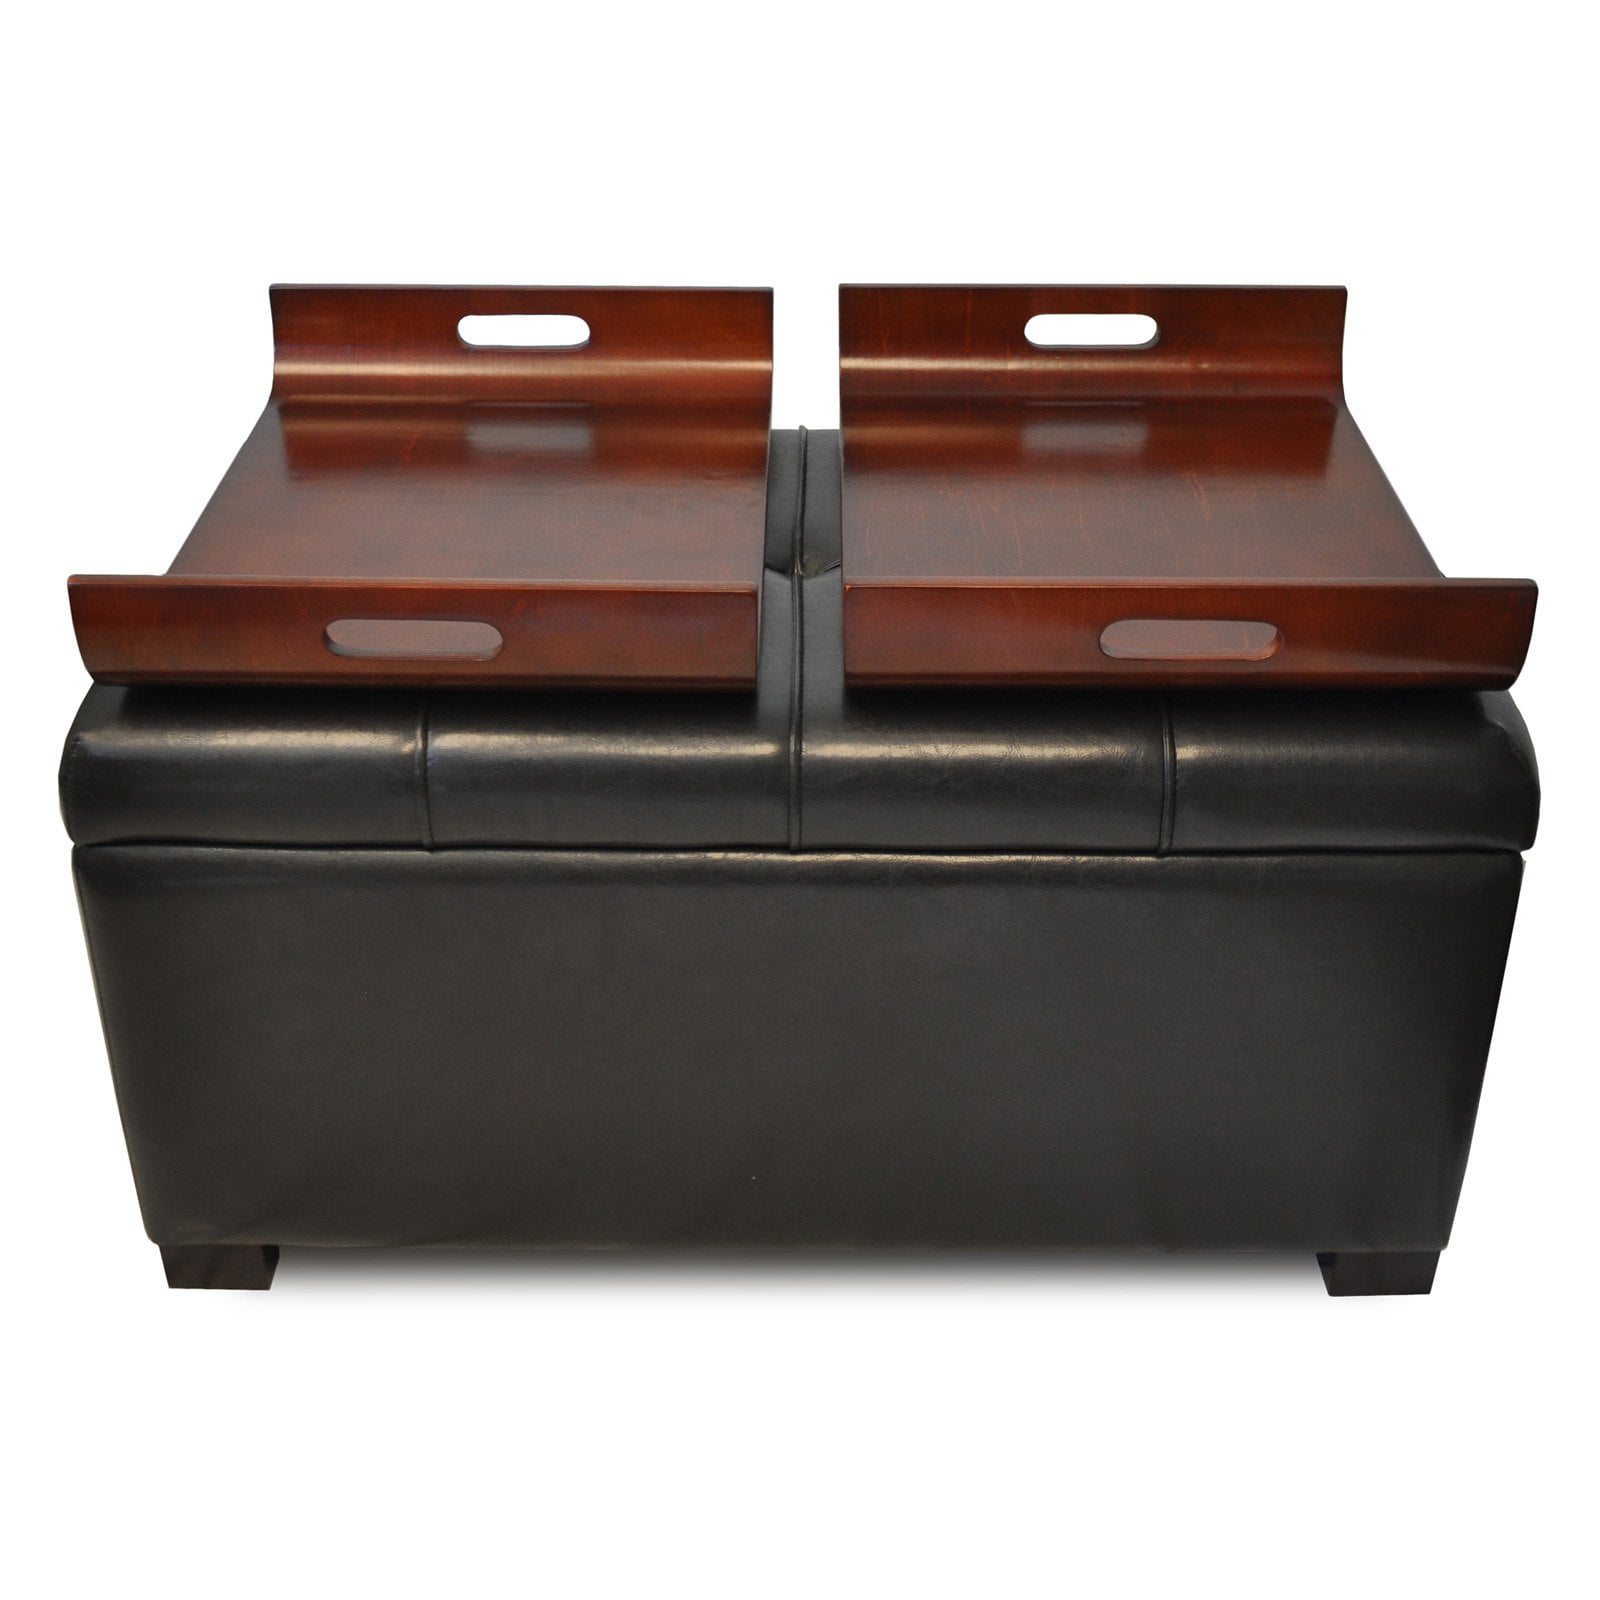 Design4comfort Faux Leather Storage, Leather Ottoman Tray